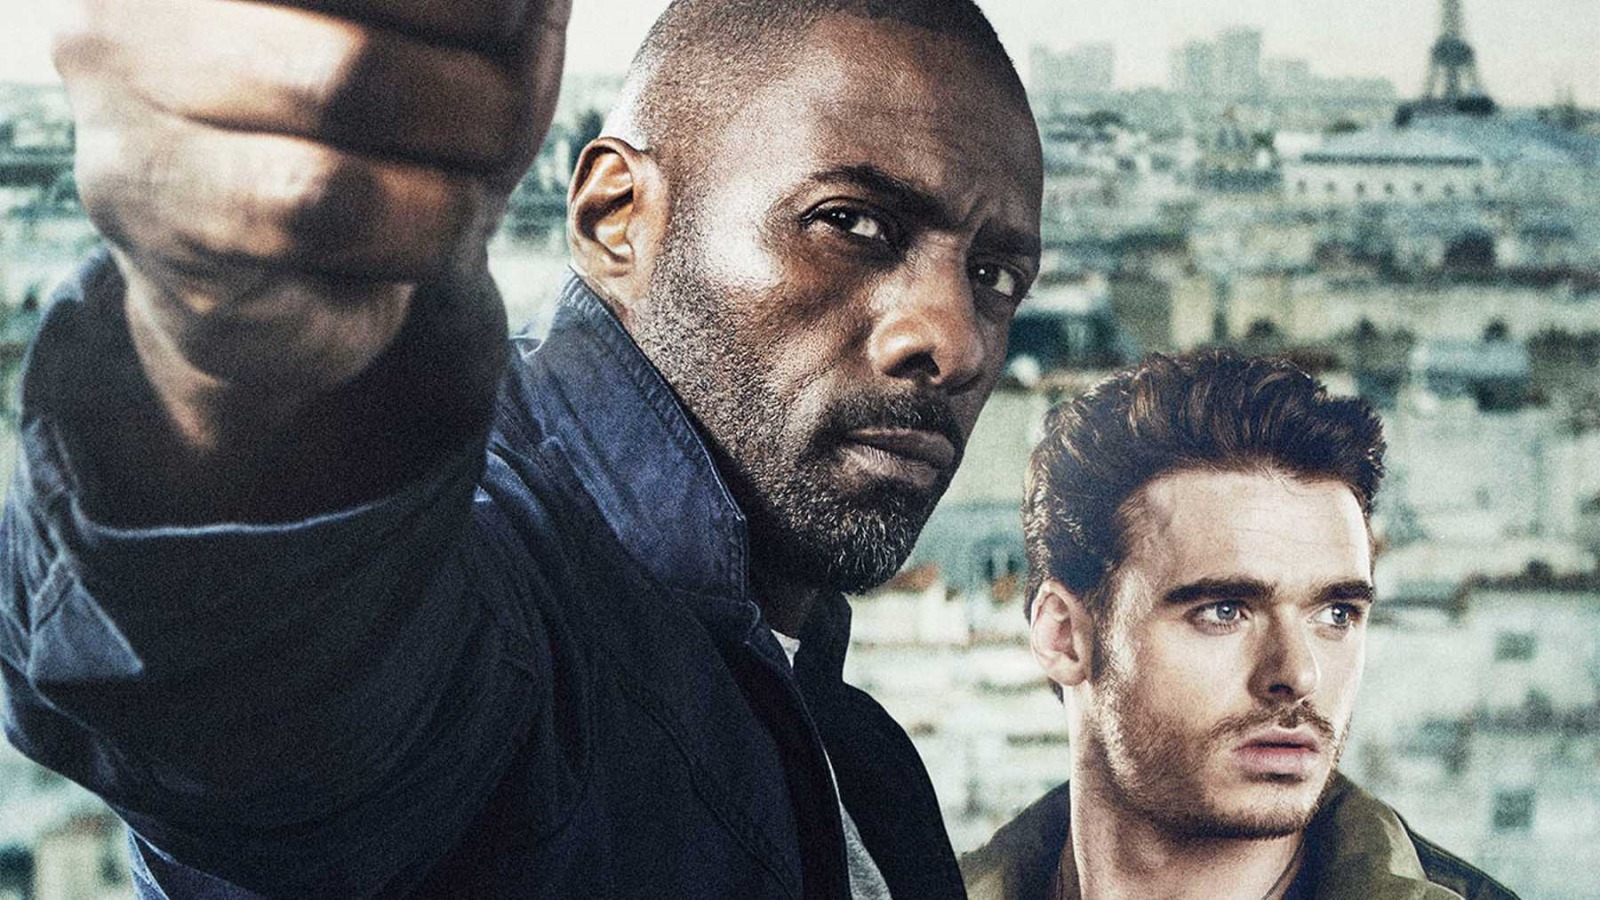 The Idris Elba Action Thriller That Just Cracked The Netflix Top 10